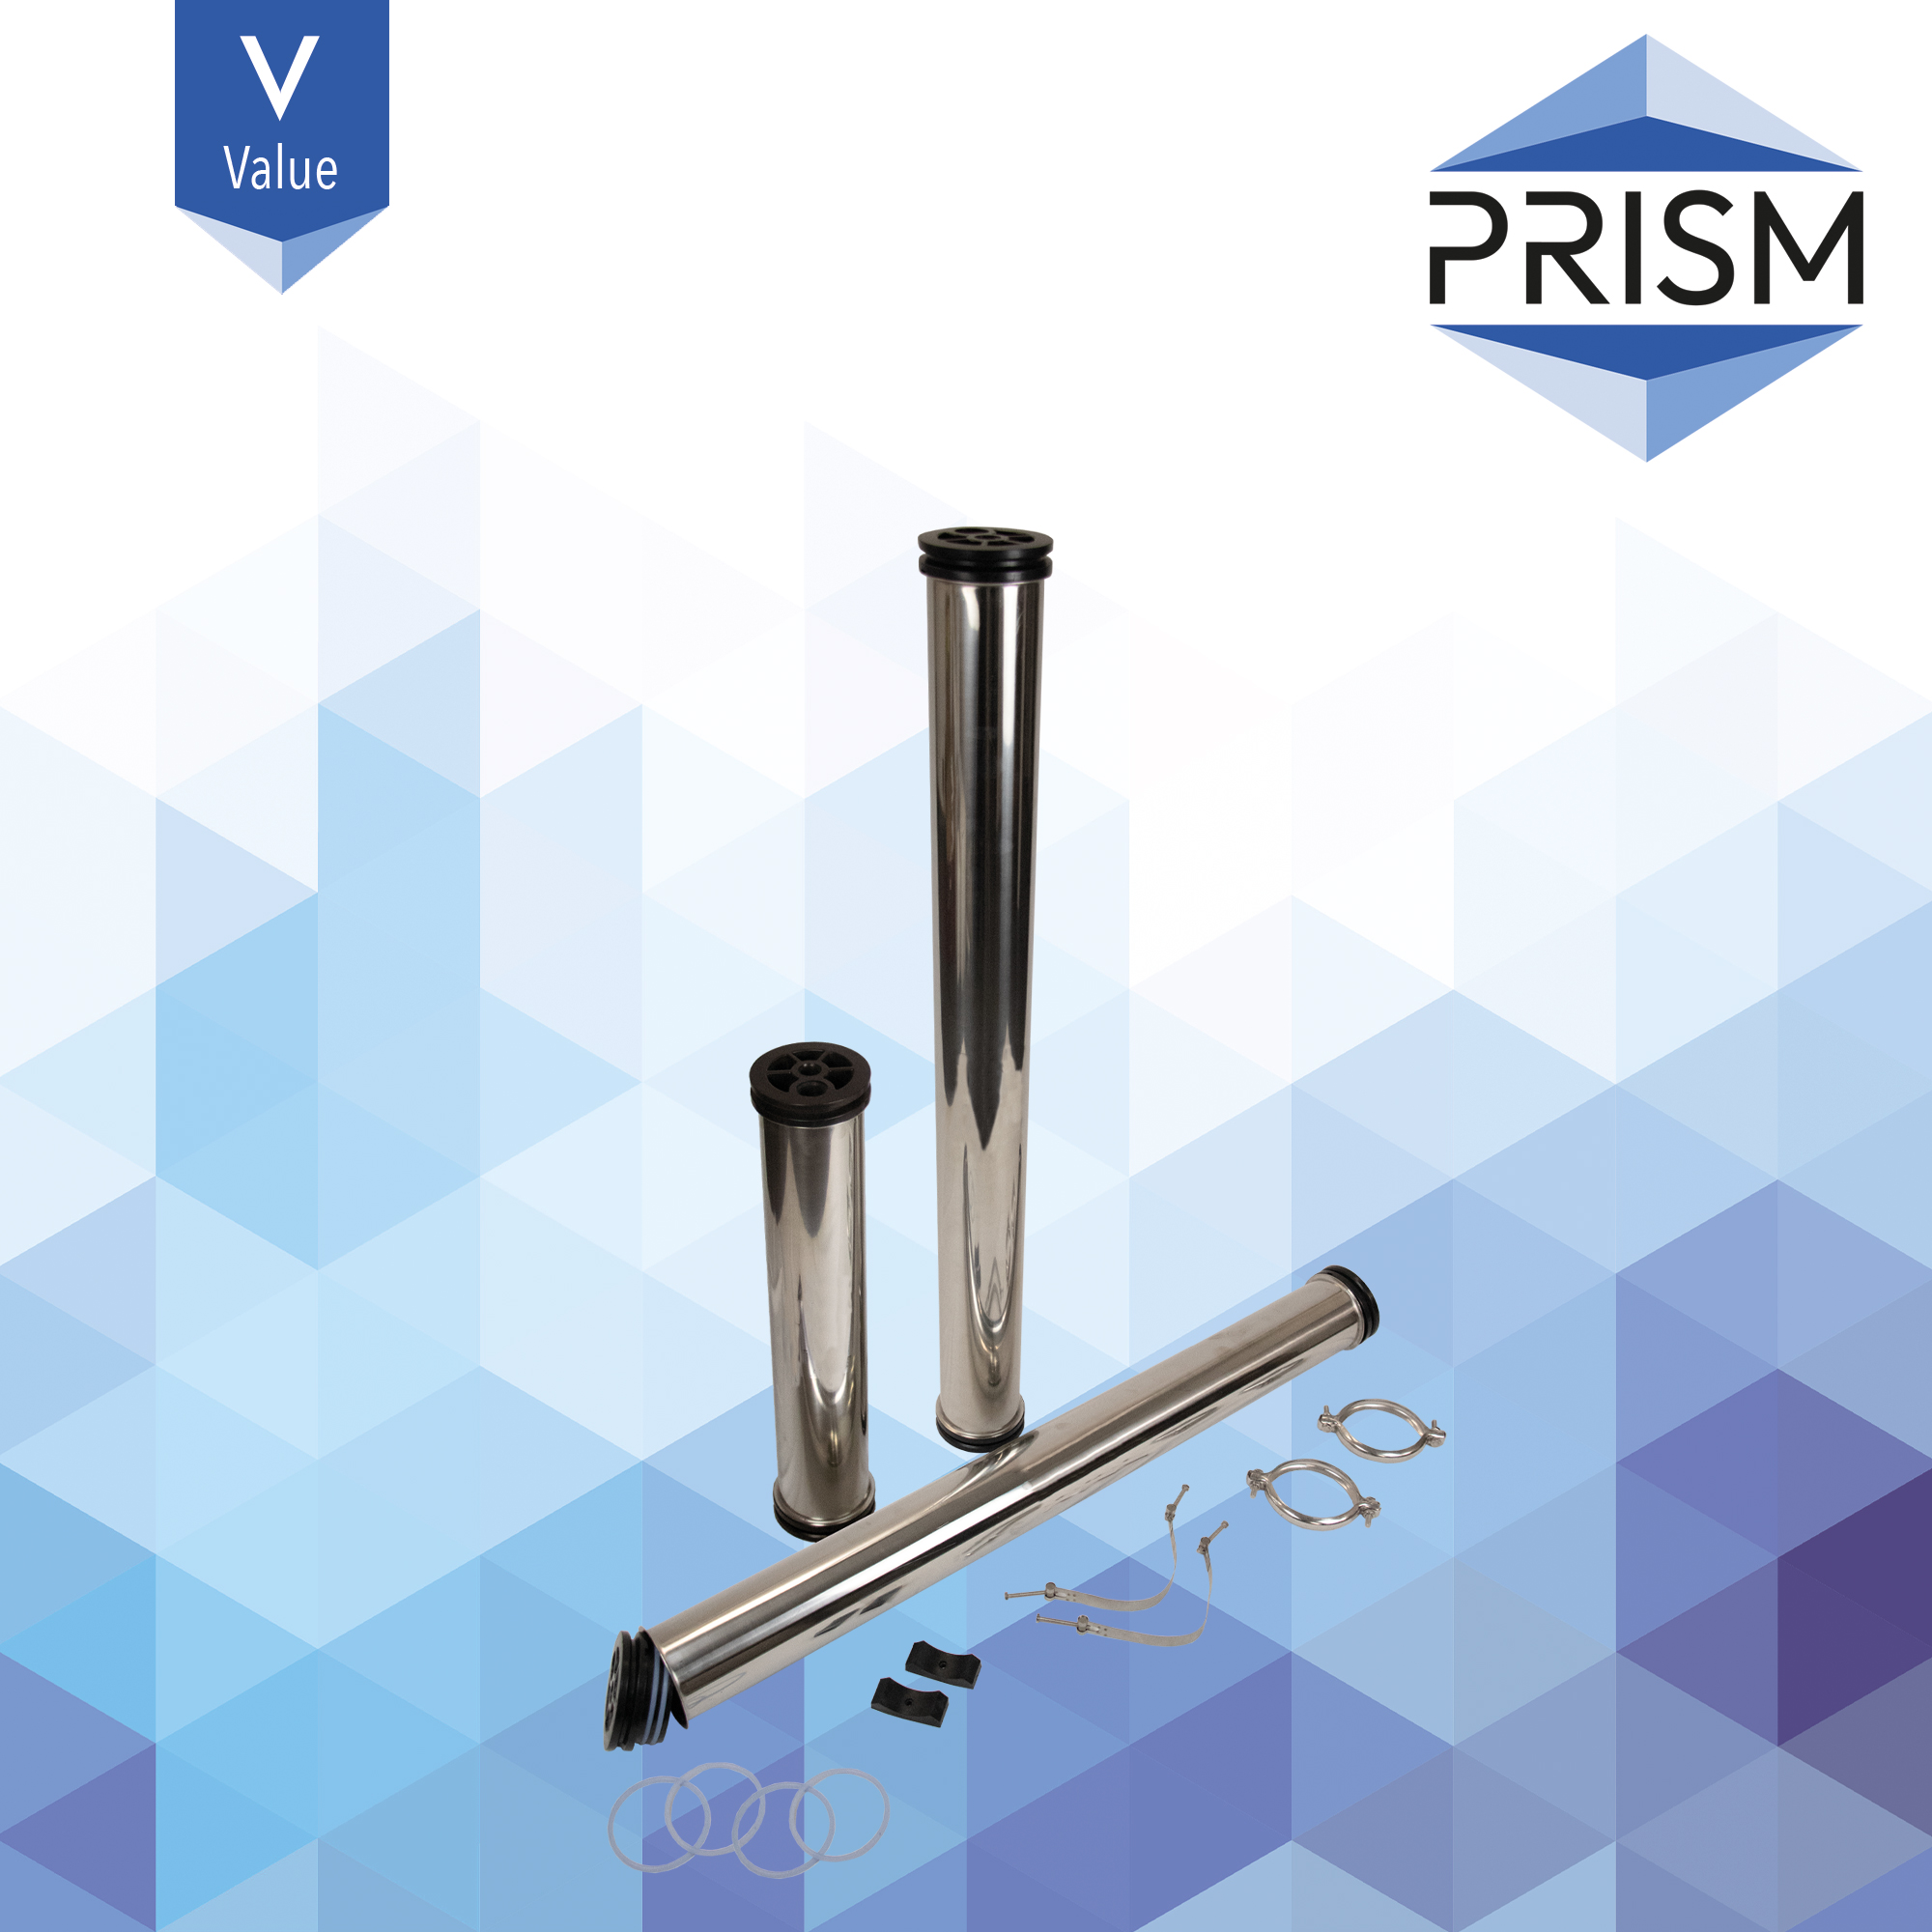 ROH-SS-4x21-1/2x3/4-V    PRISM VALUE RANGE :  Stainless Steel Membrane Housing 4 x 21